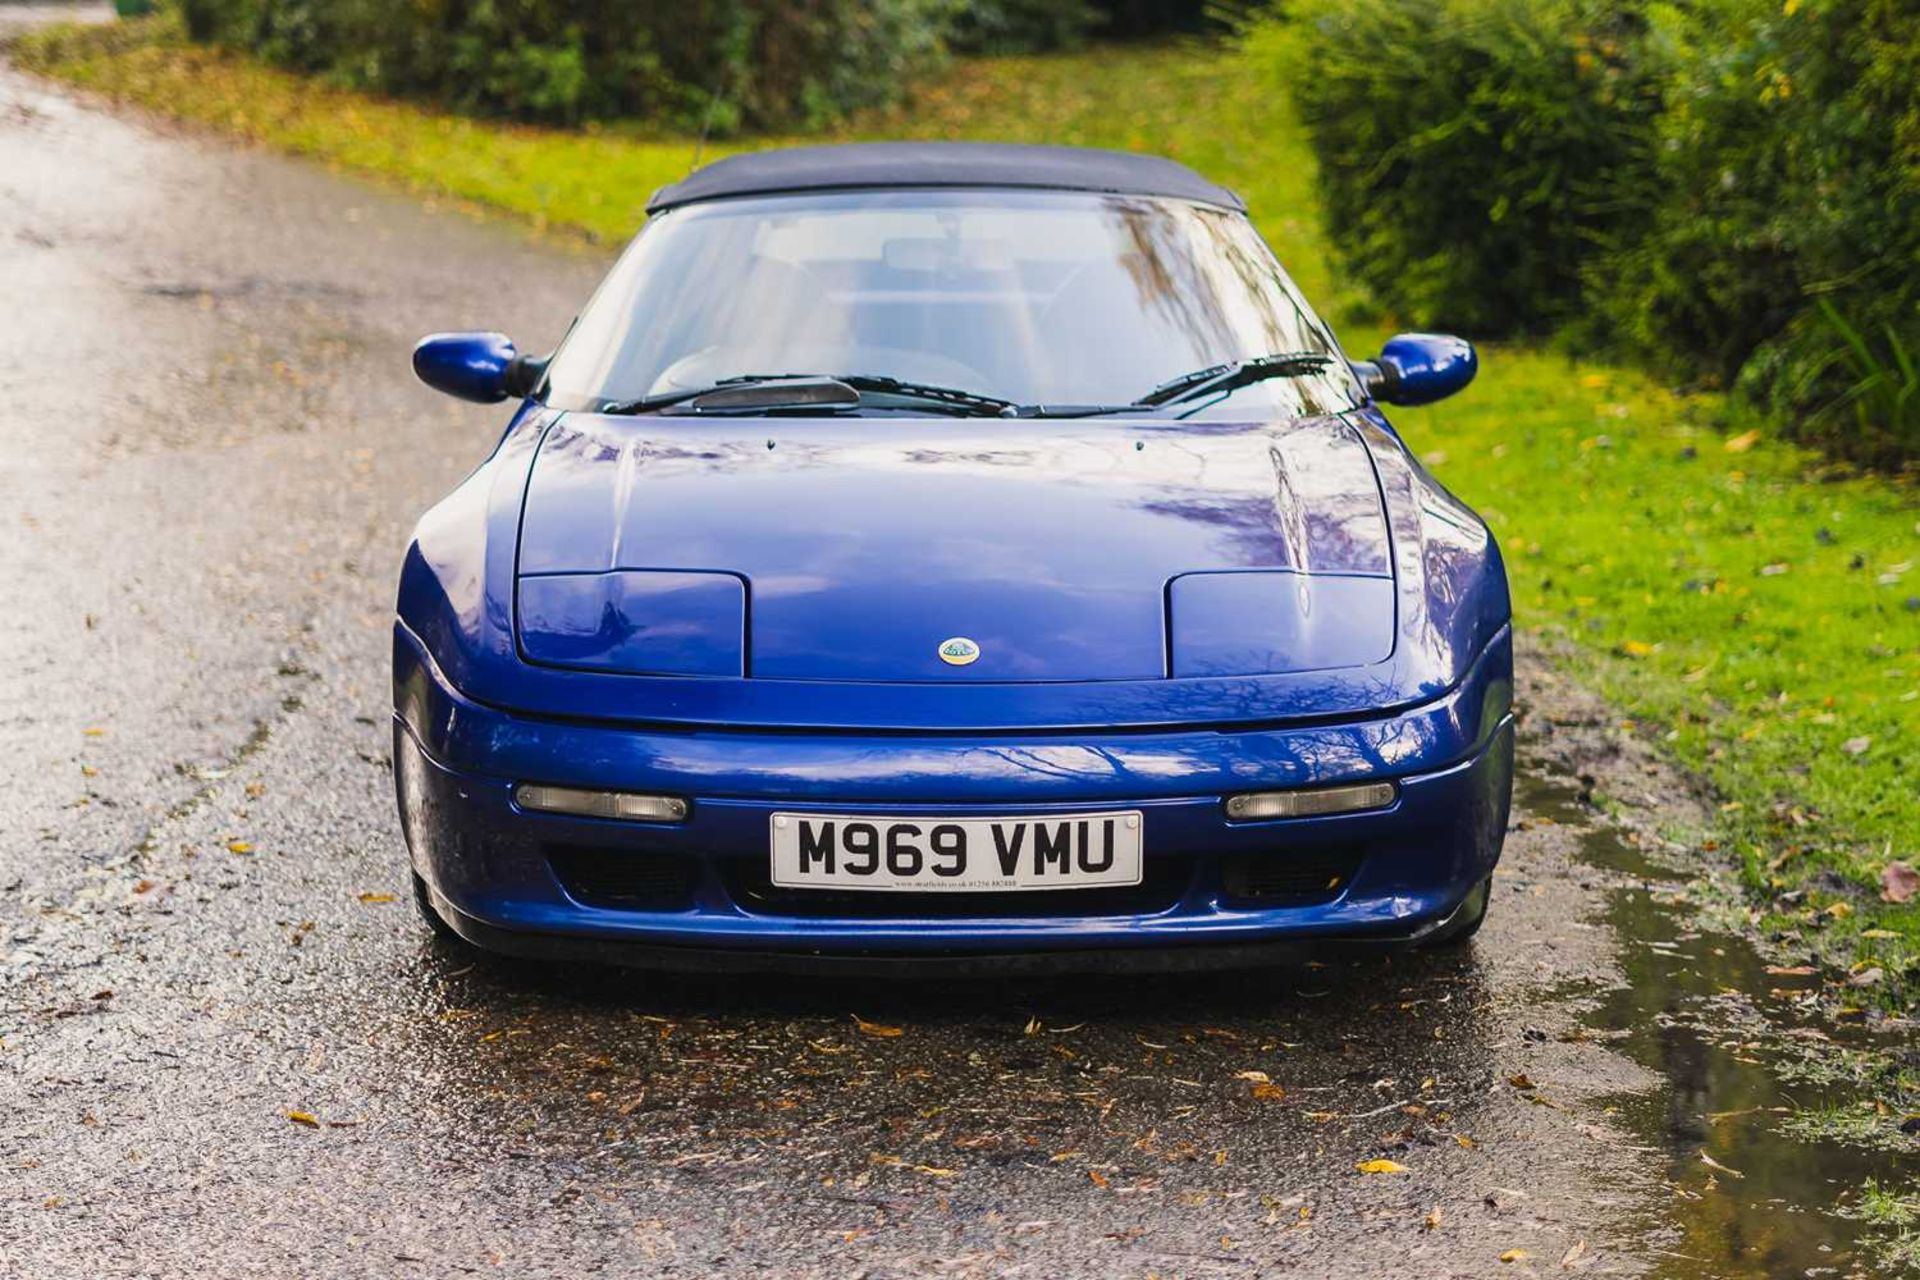 1995 Lotus Elan M100 S2 Turbo ***NO RESERVE*** Limited edition no. 673 of just 800 second series mod - Image 3 of 52